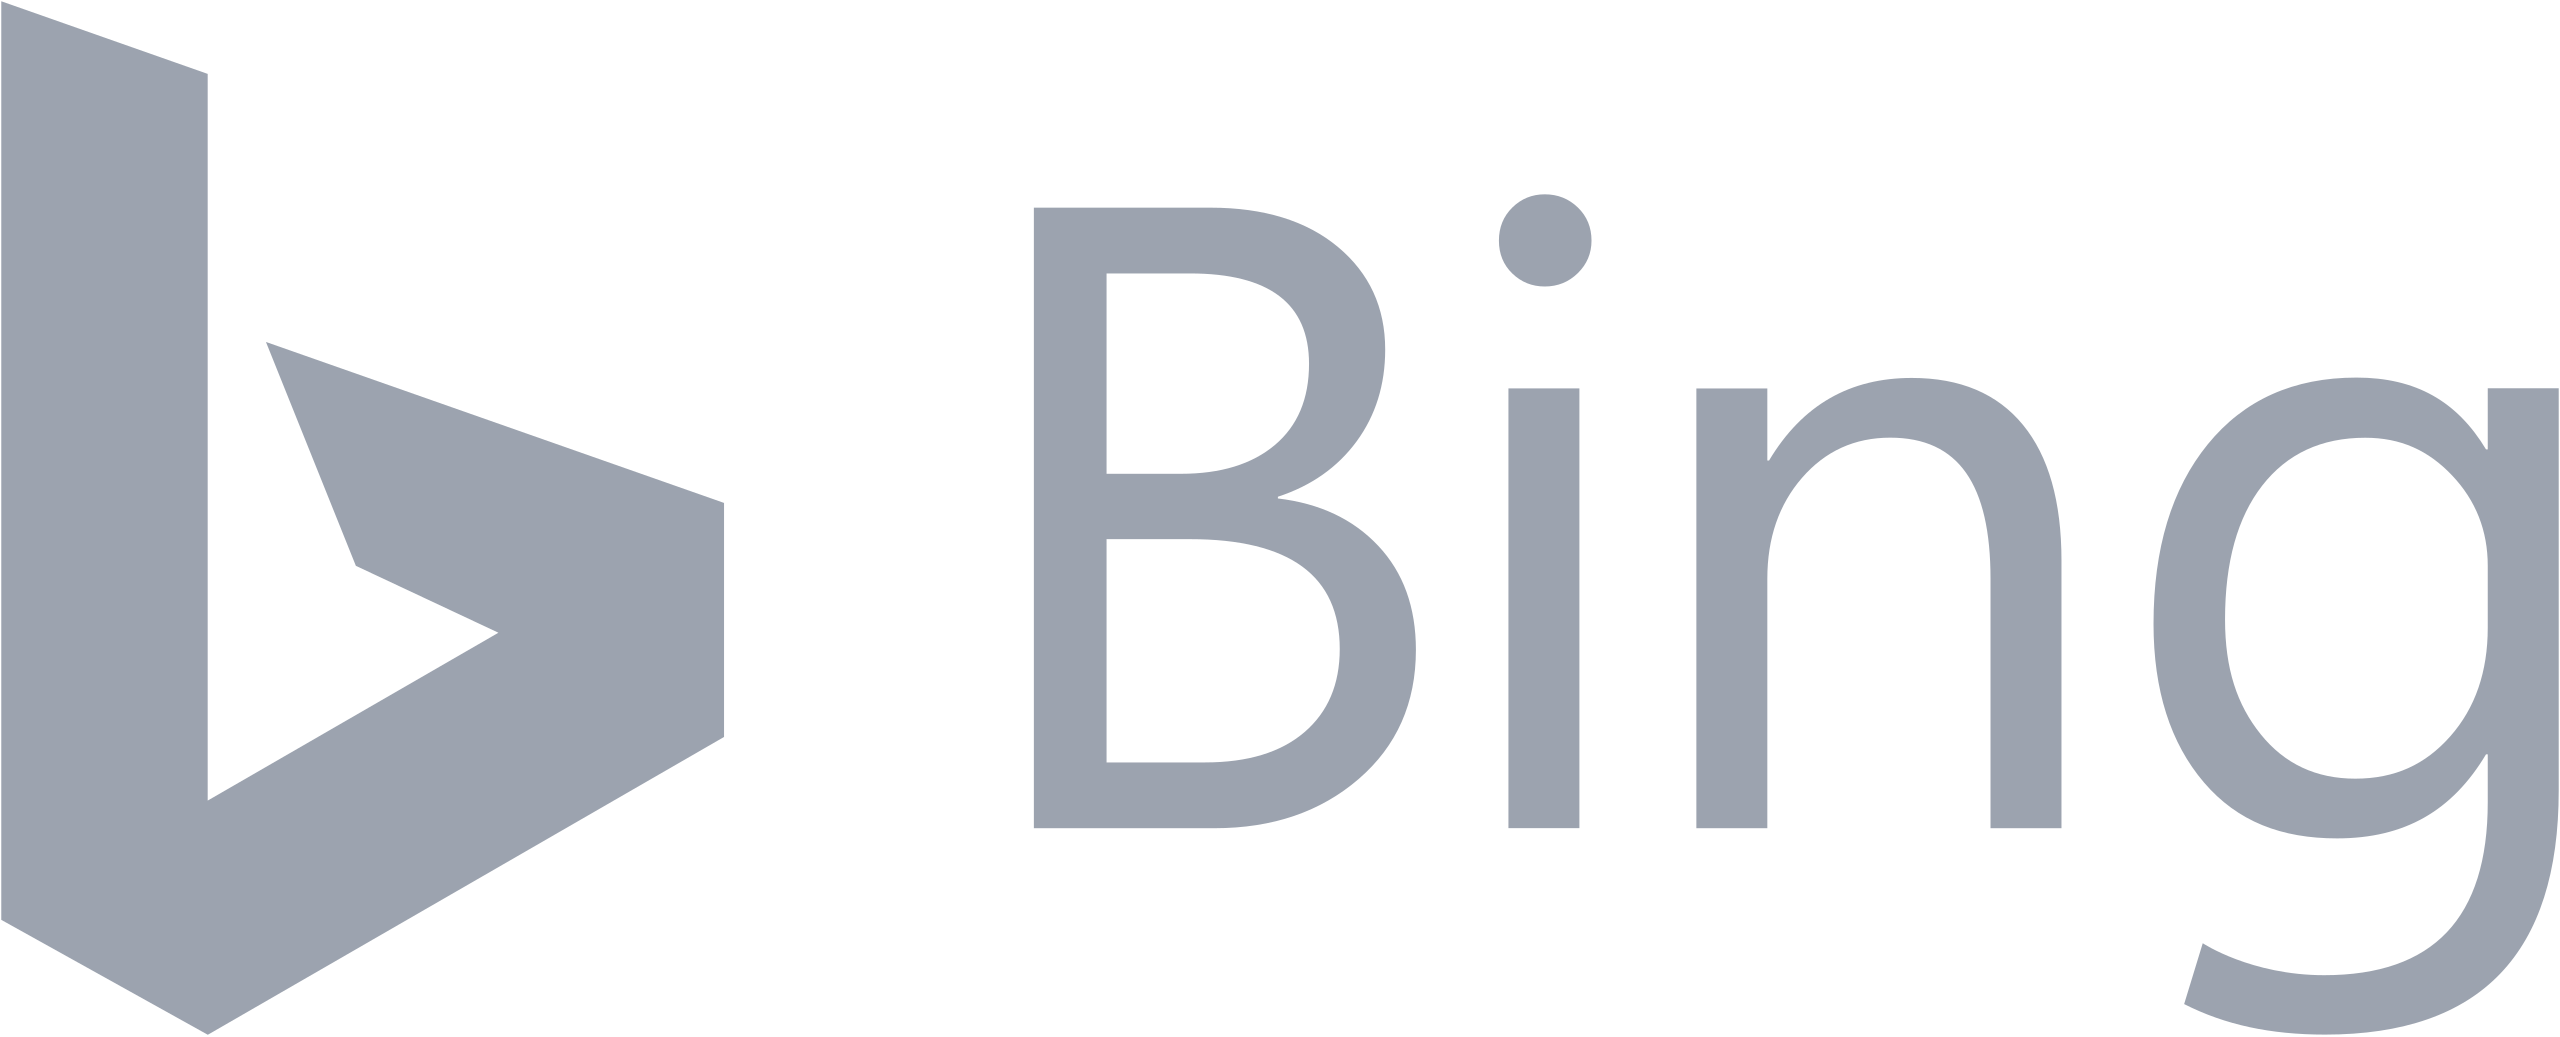 the bing logo on a black background with link to bing